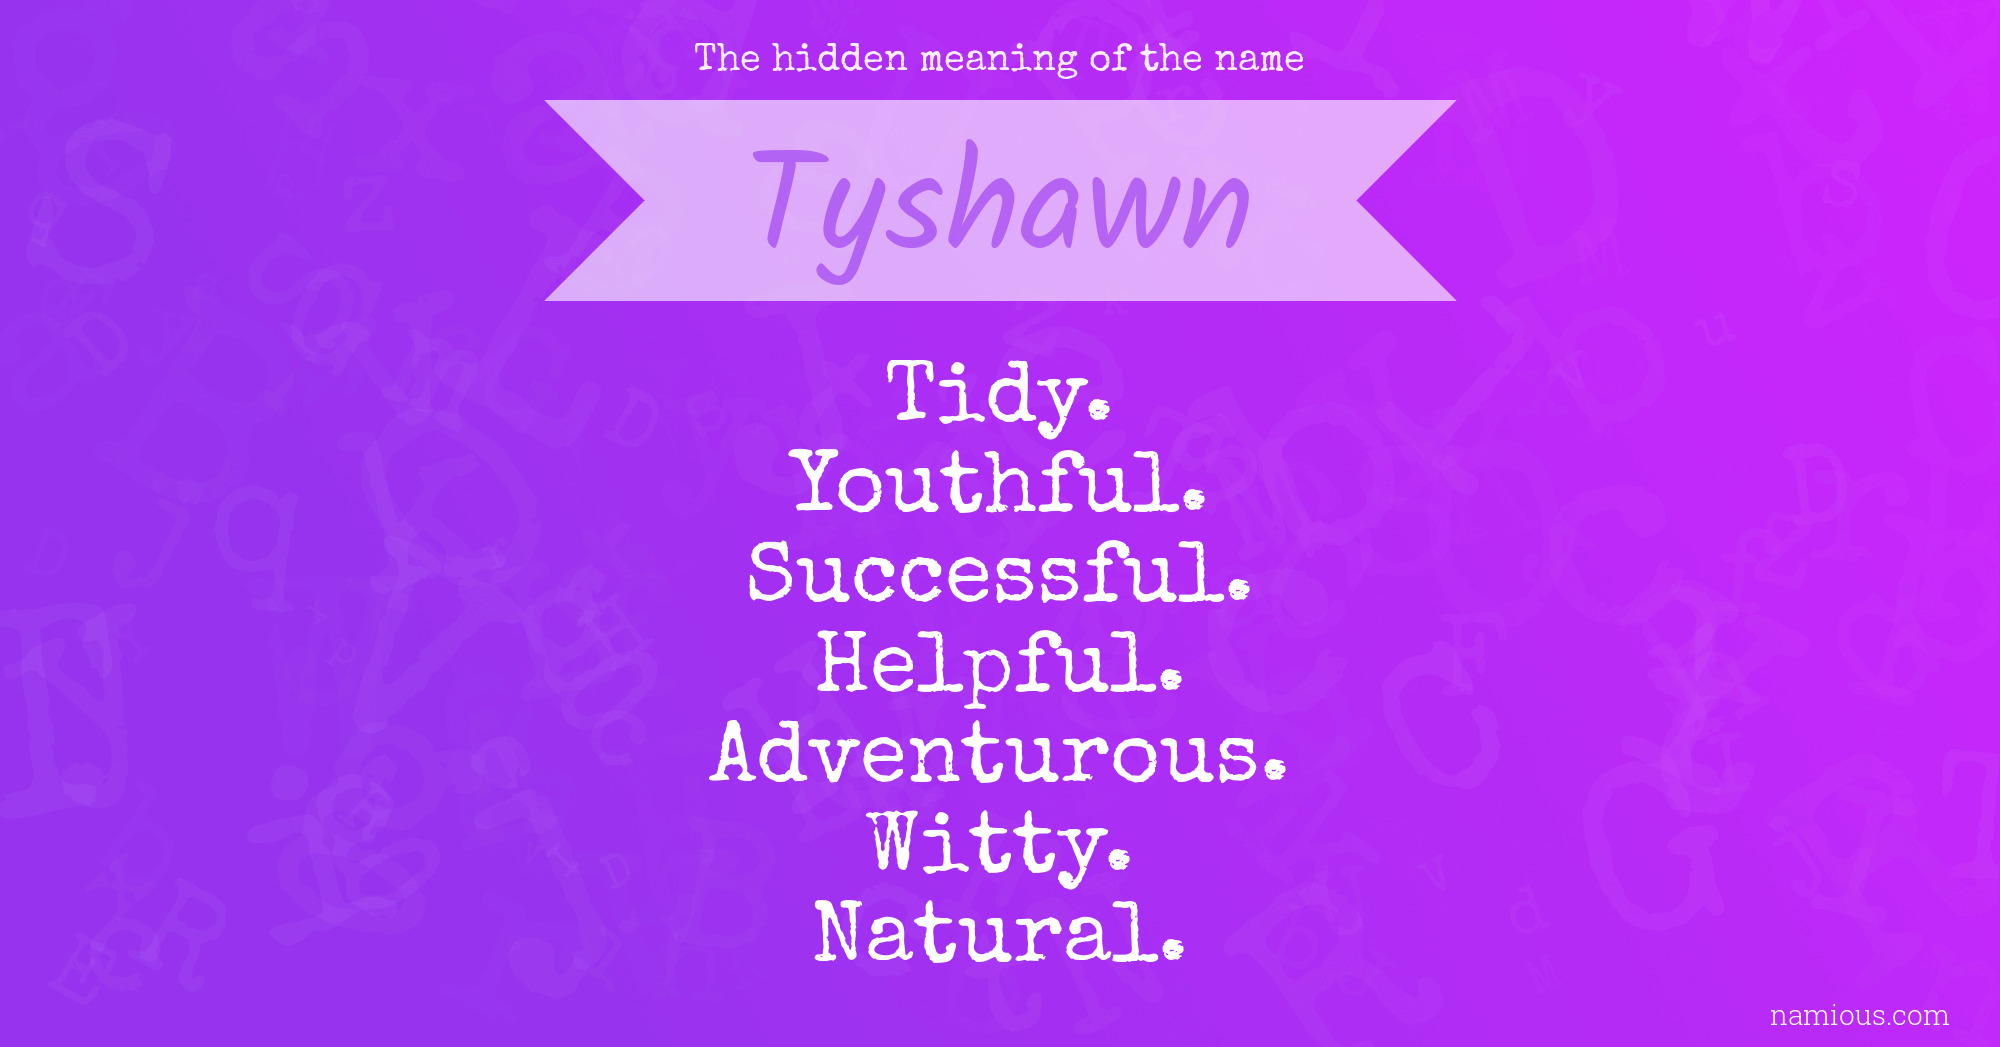 The hidden meaning of the name Tyshawn